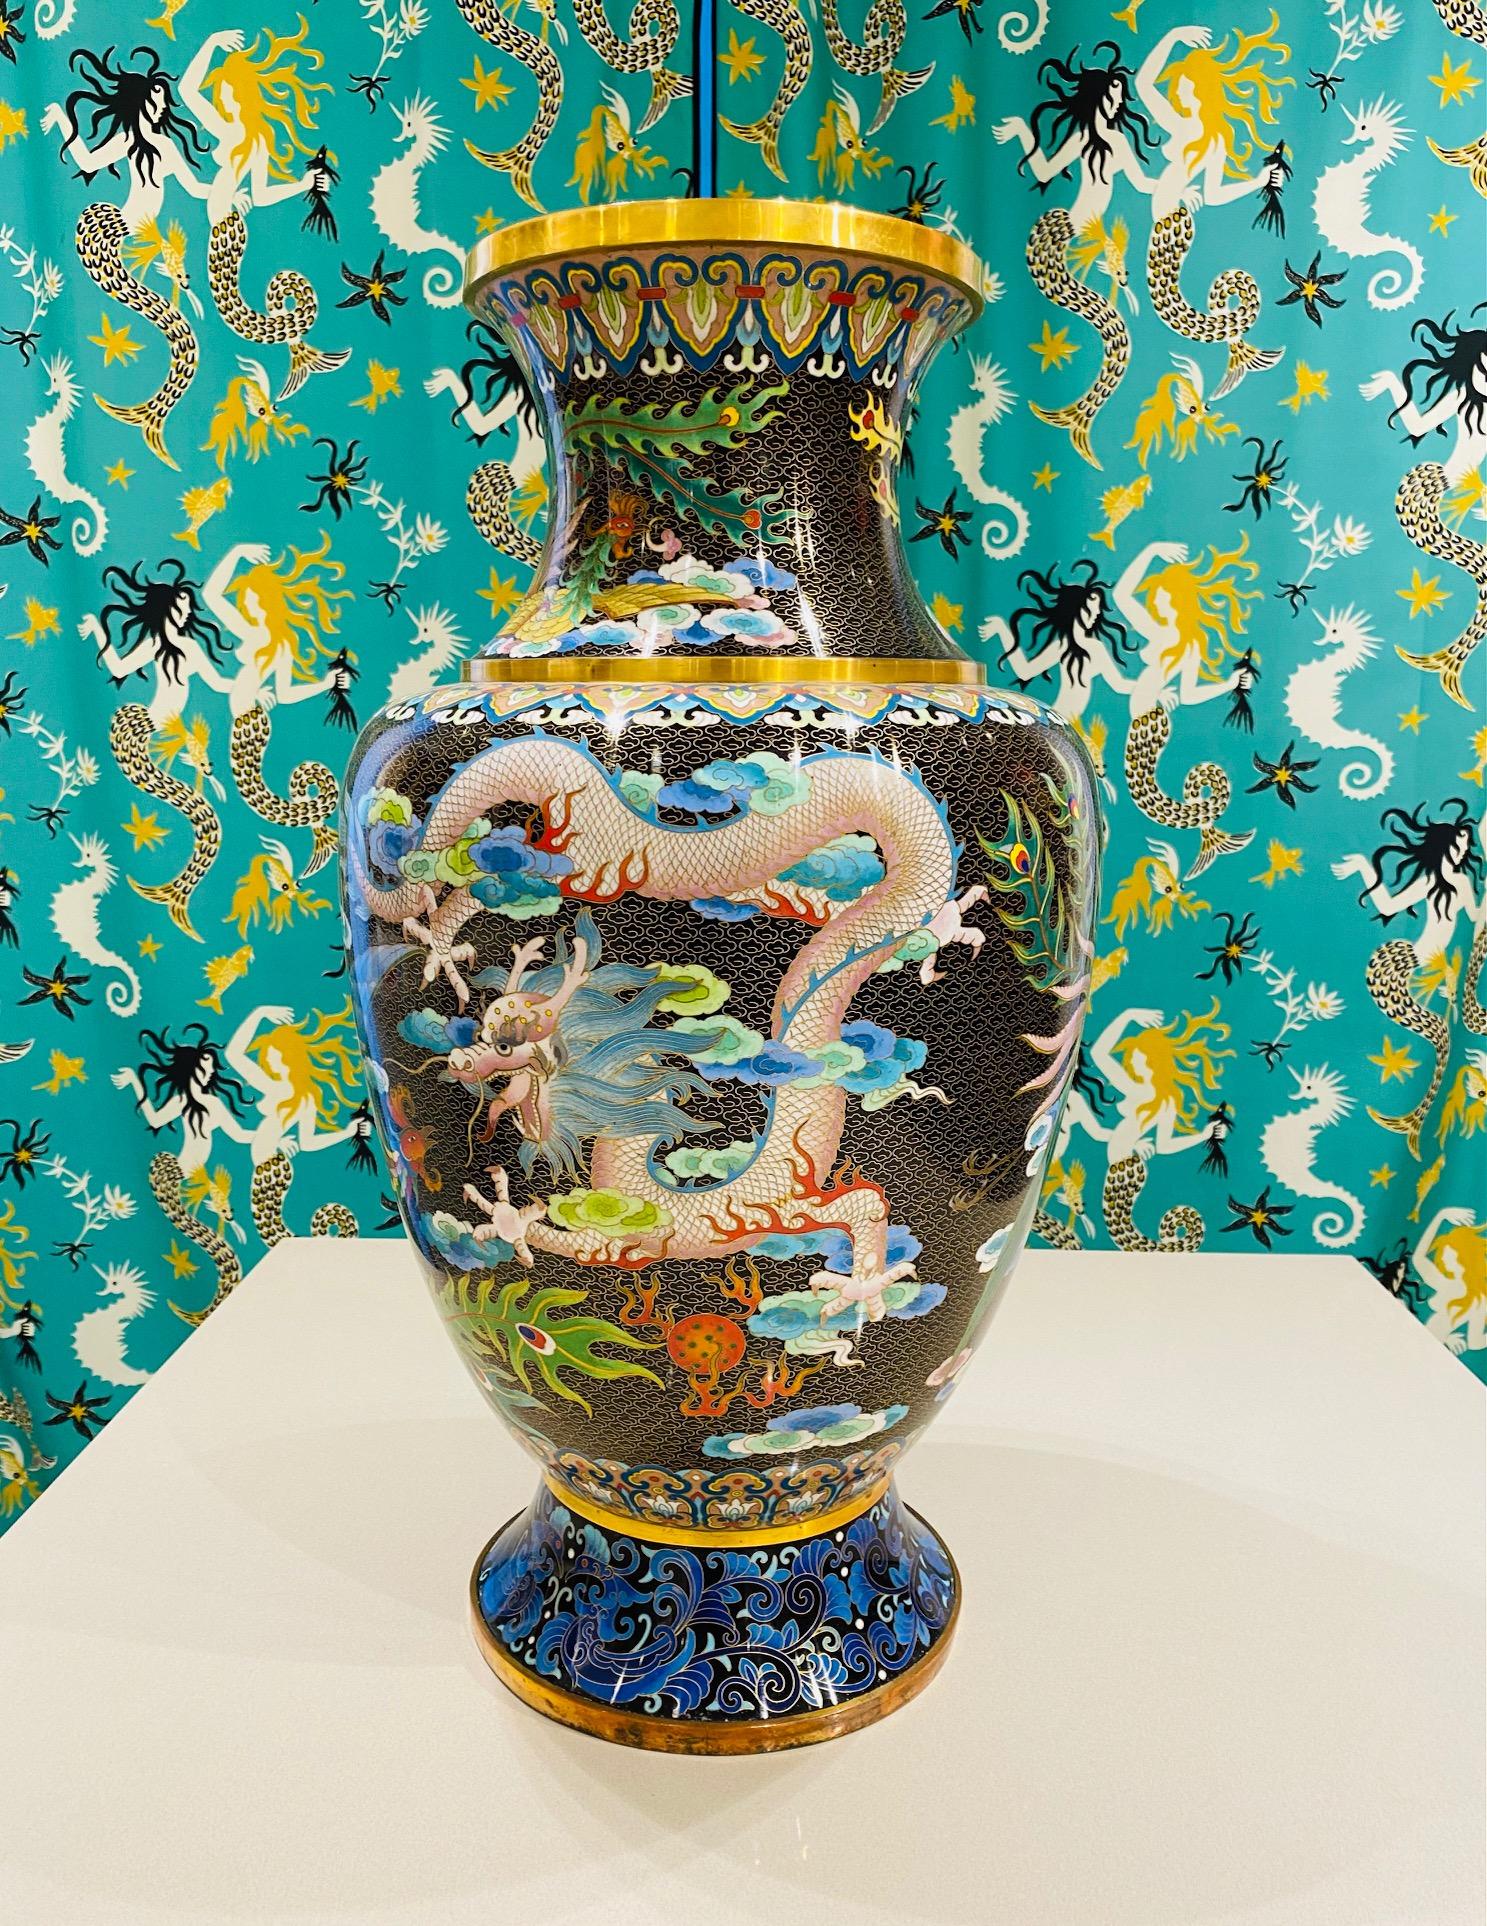 1940's Chinese Cloisonné large vase. Cloisonné is an ancient technique which incorporates decorative materials like enamel, colored glass, or gemstones into metalwork objects bound by wire on metal backing. The vase features extraordinary depictions